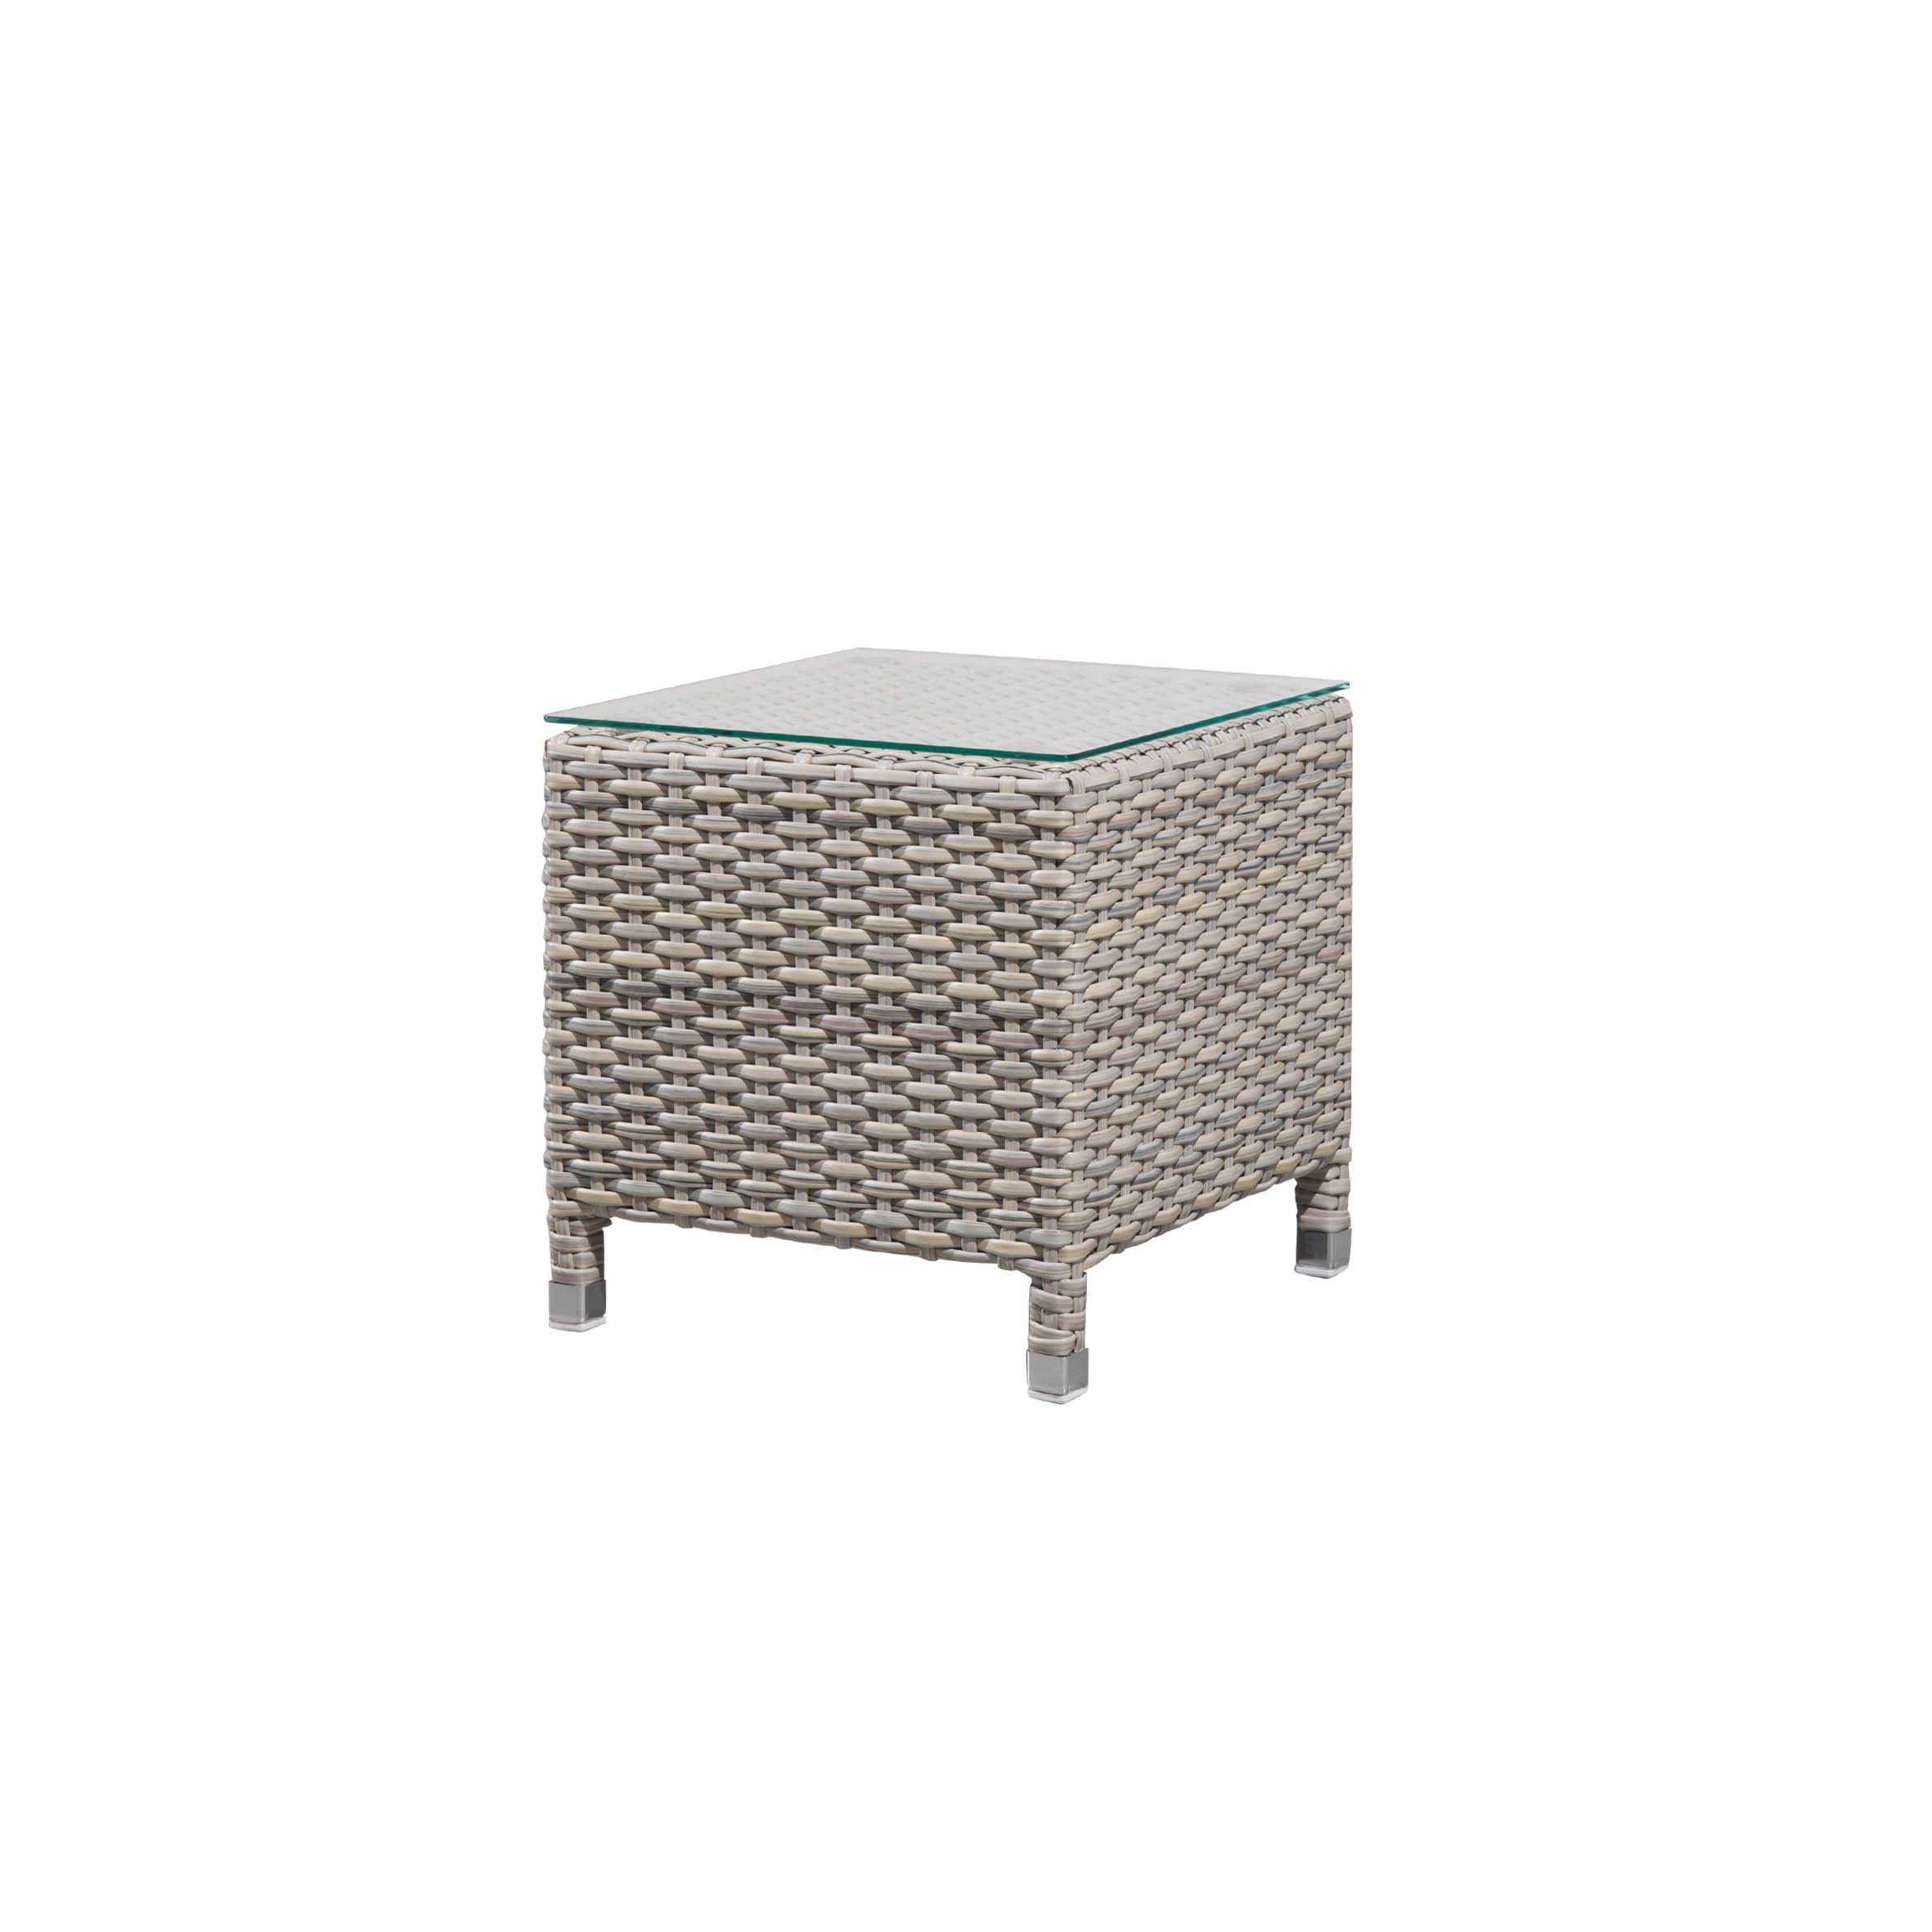 Ideal rattan side table S1